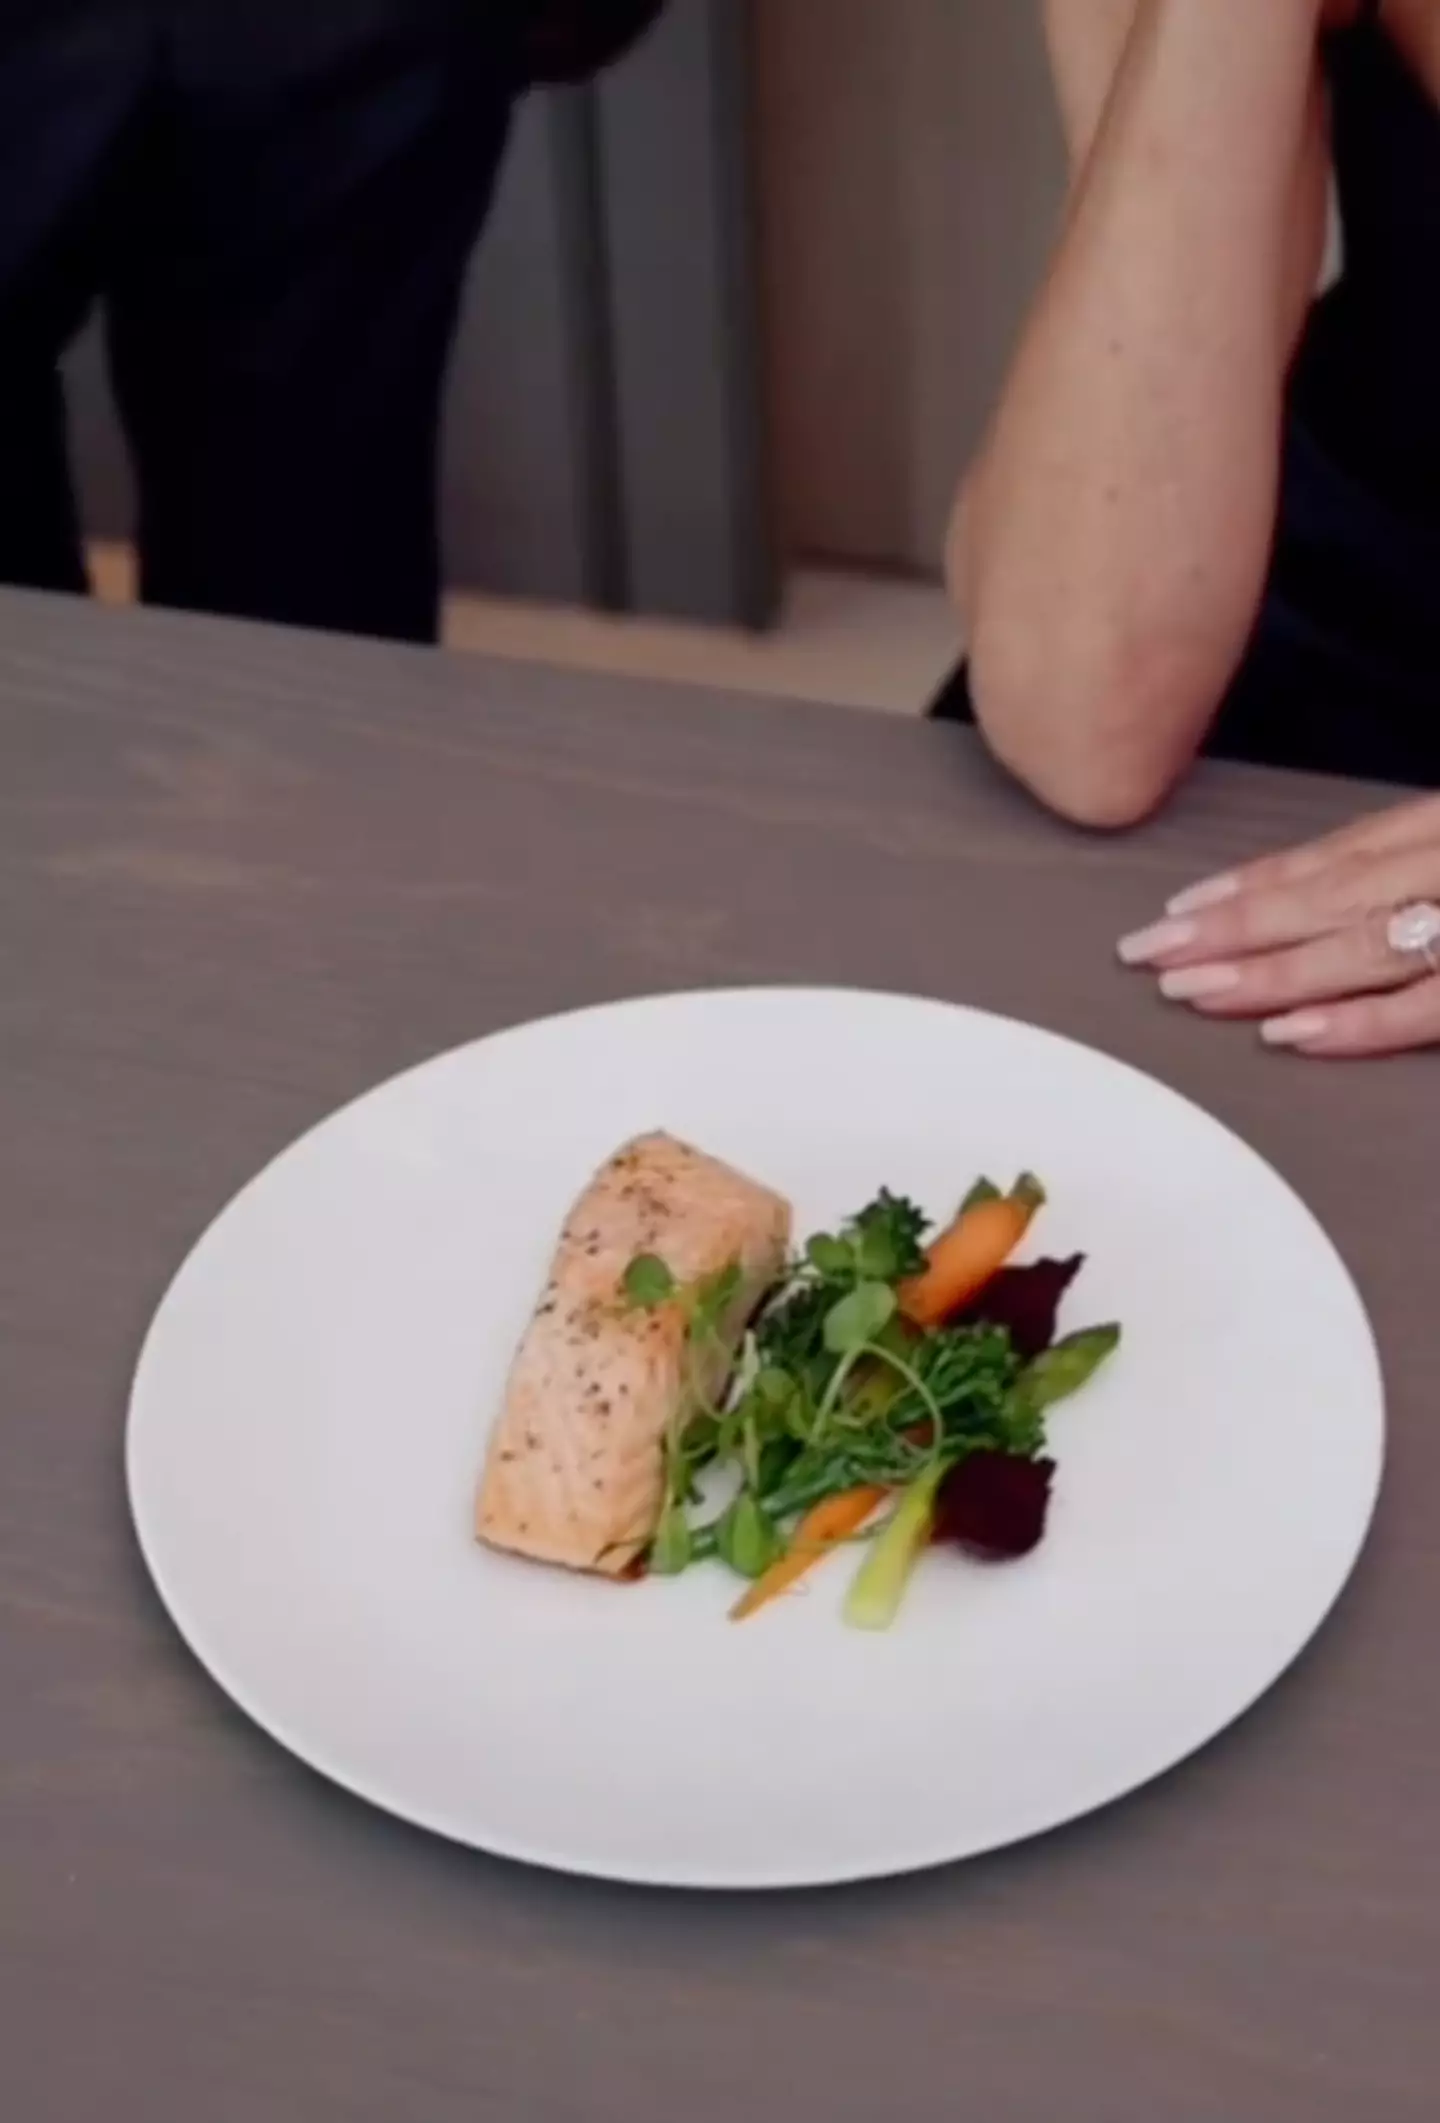 The dish revealed a plate of salmon and vegetables.